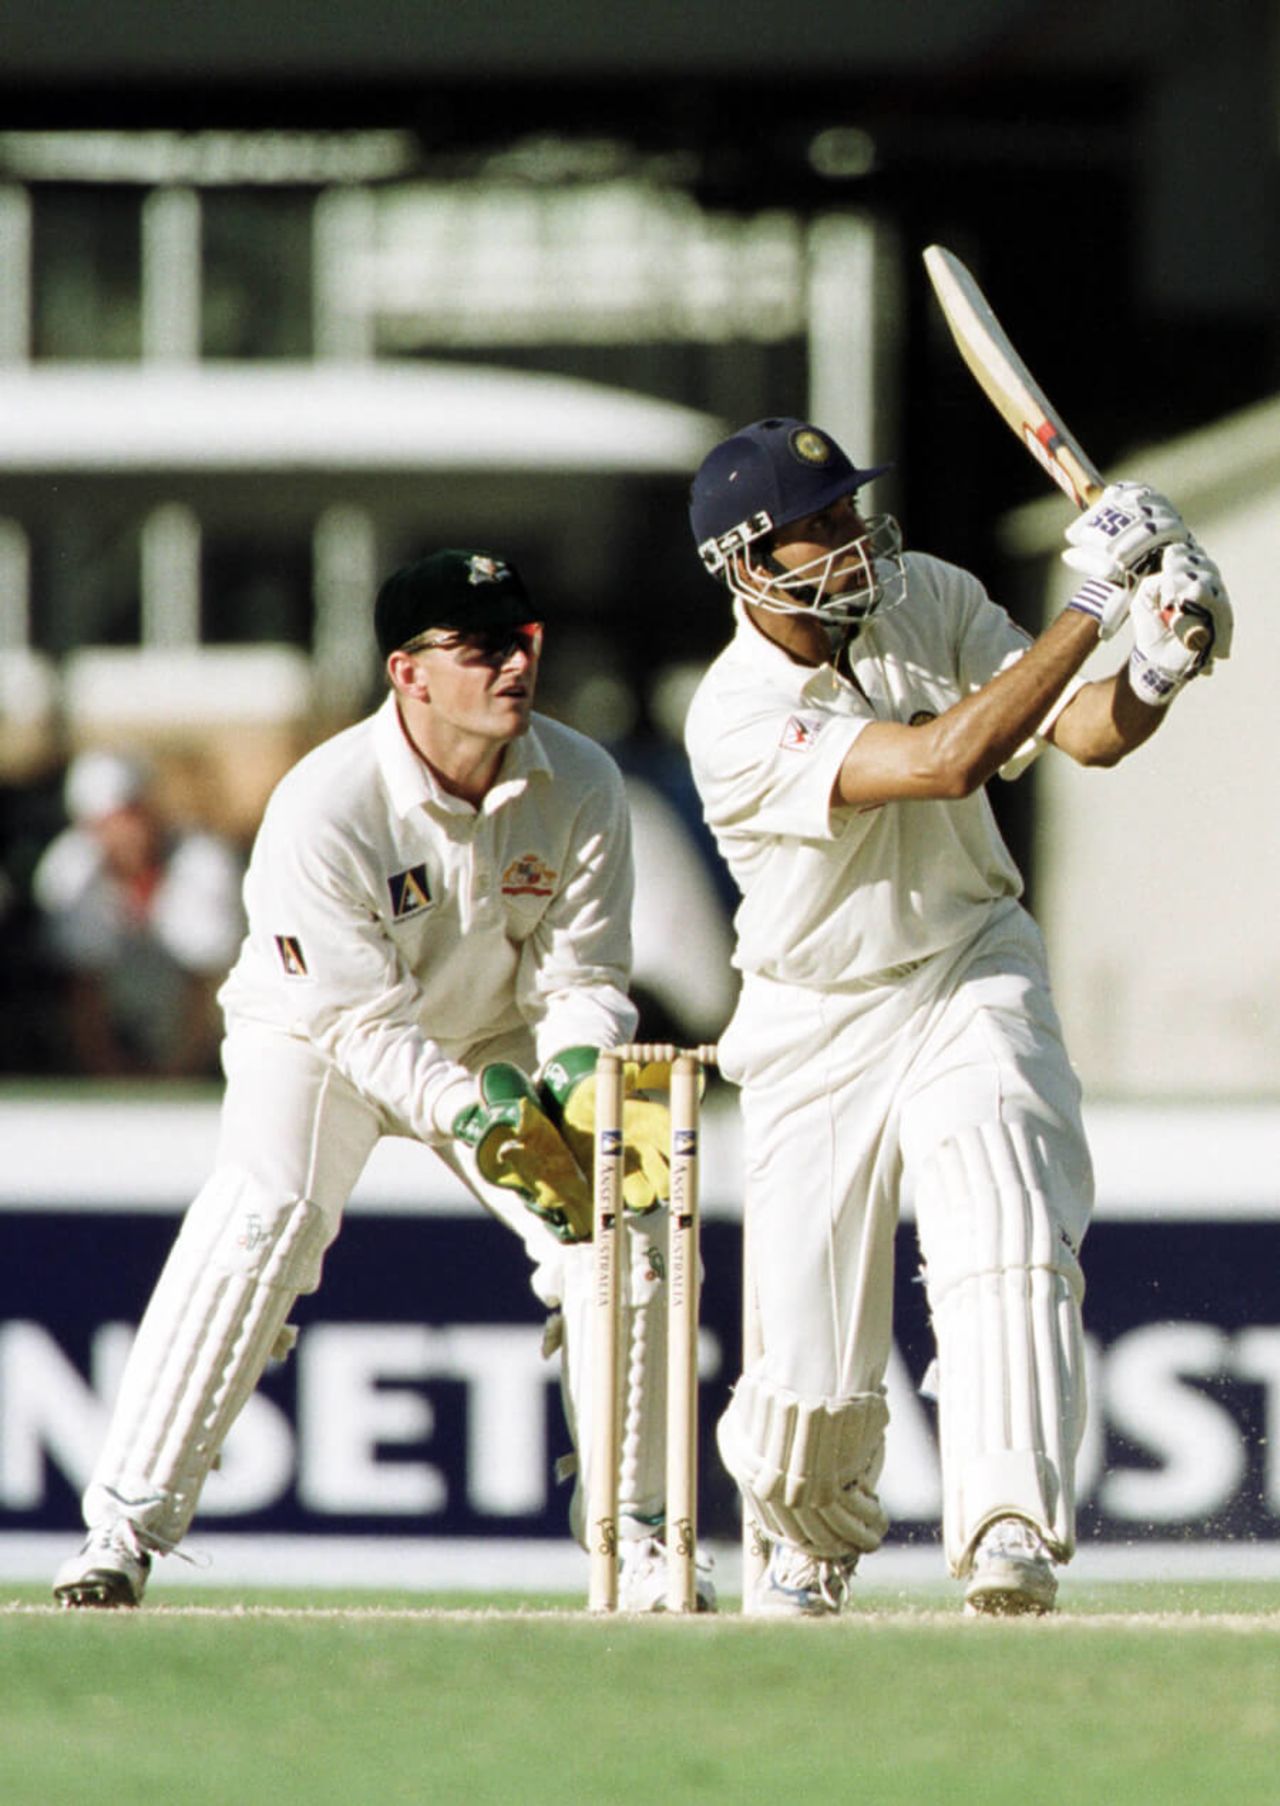 VVS Laxman steers one to the leg side, Australia v India, 3rd Test, Sydney, 3rd day, January 4, 2000